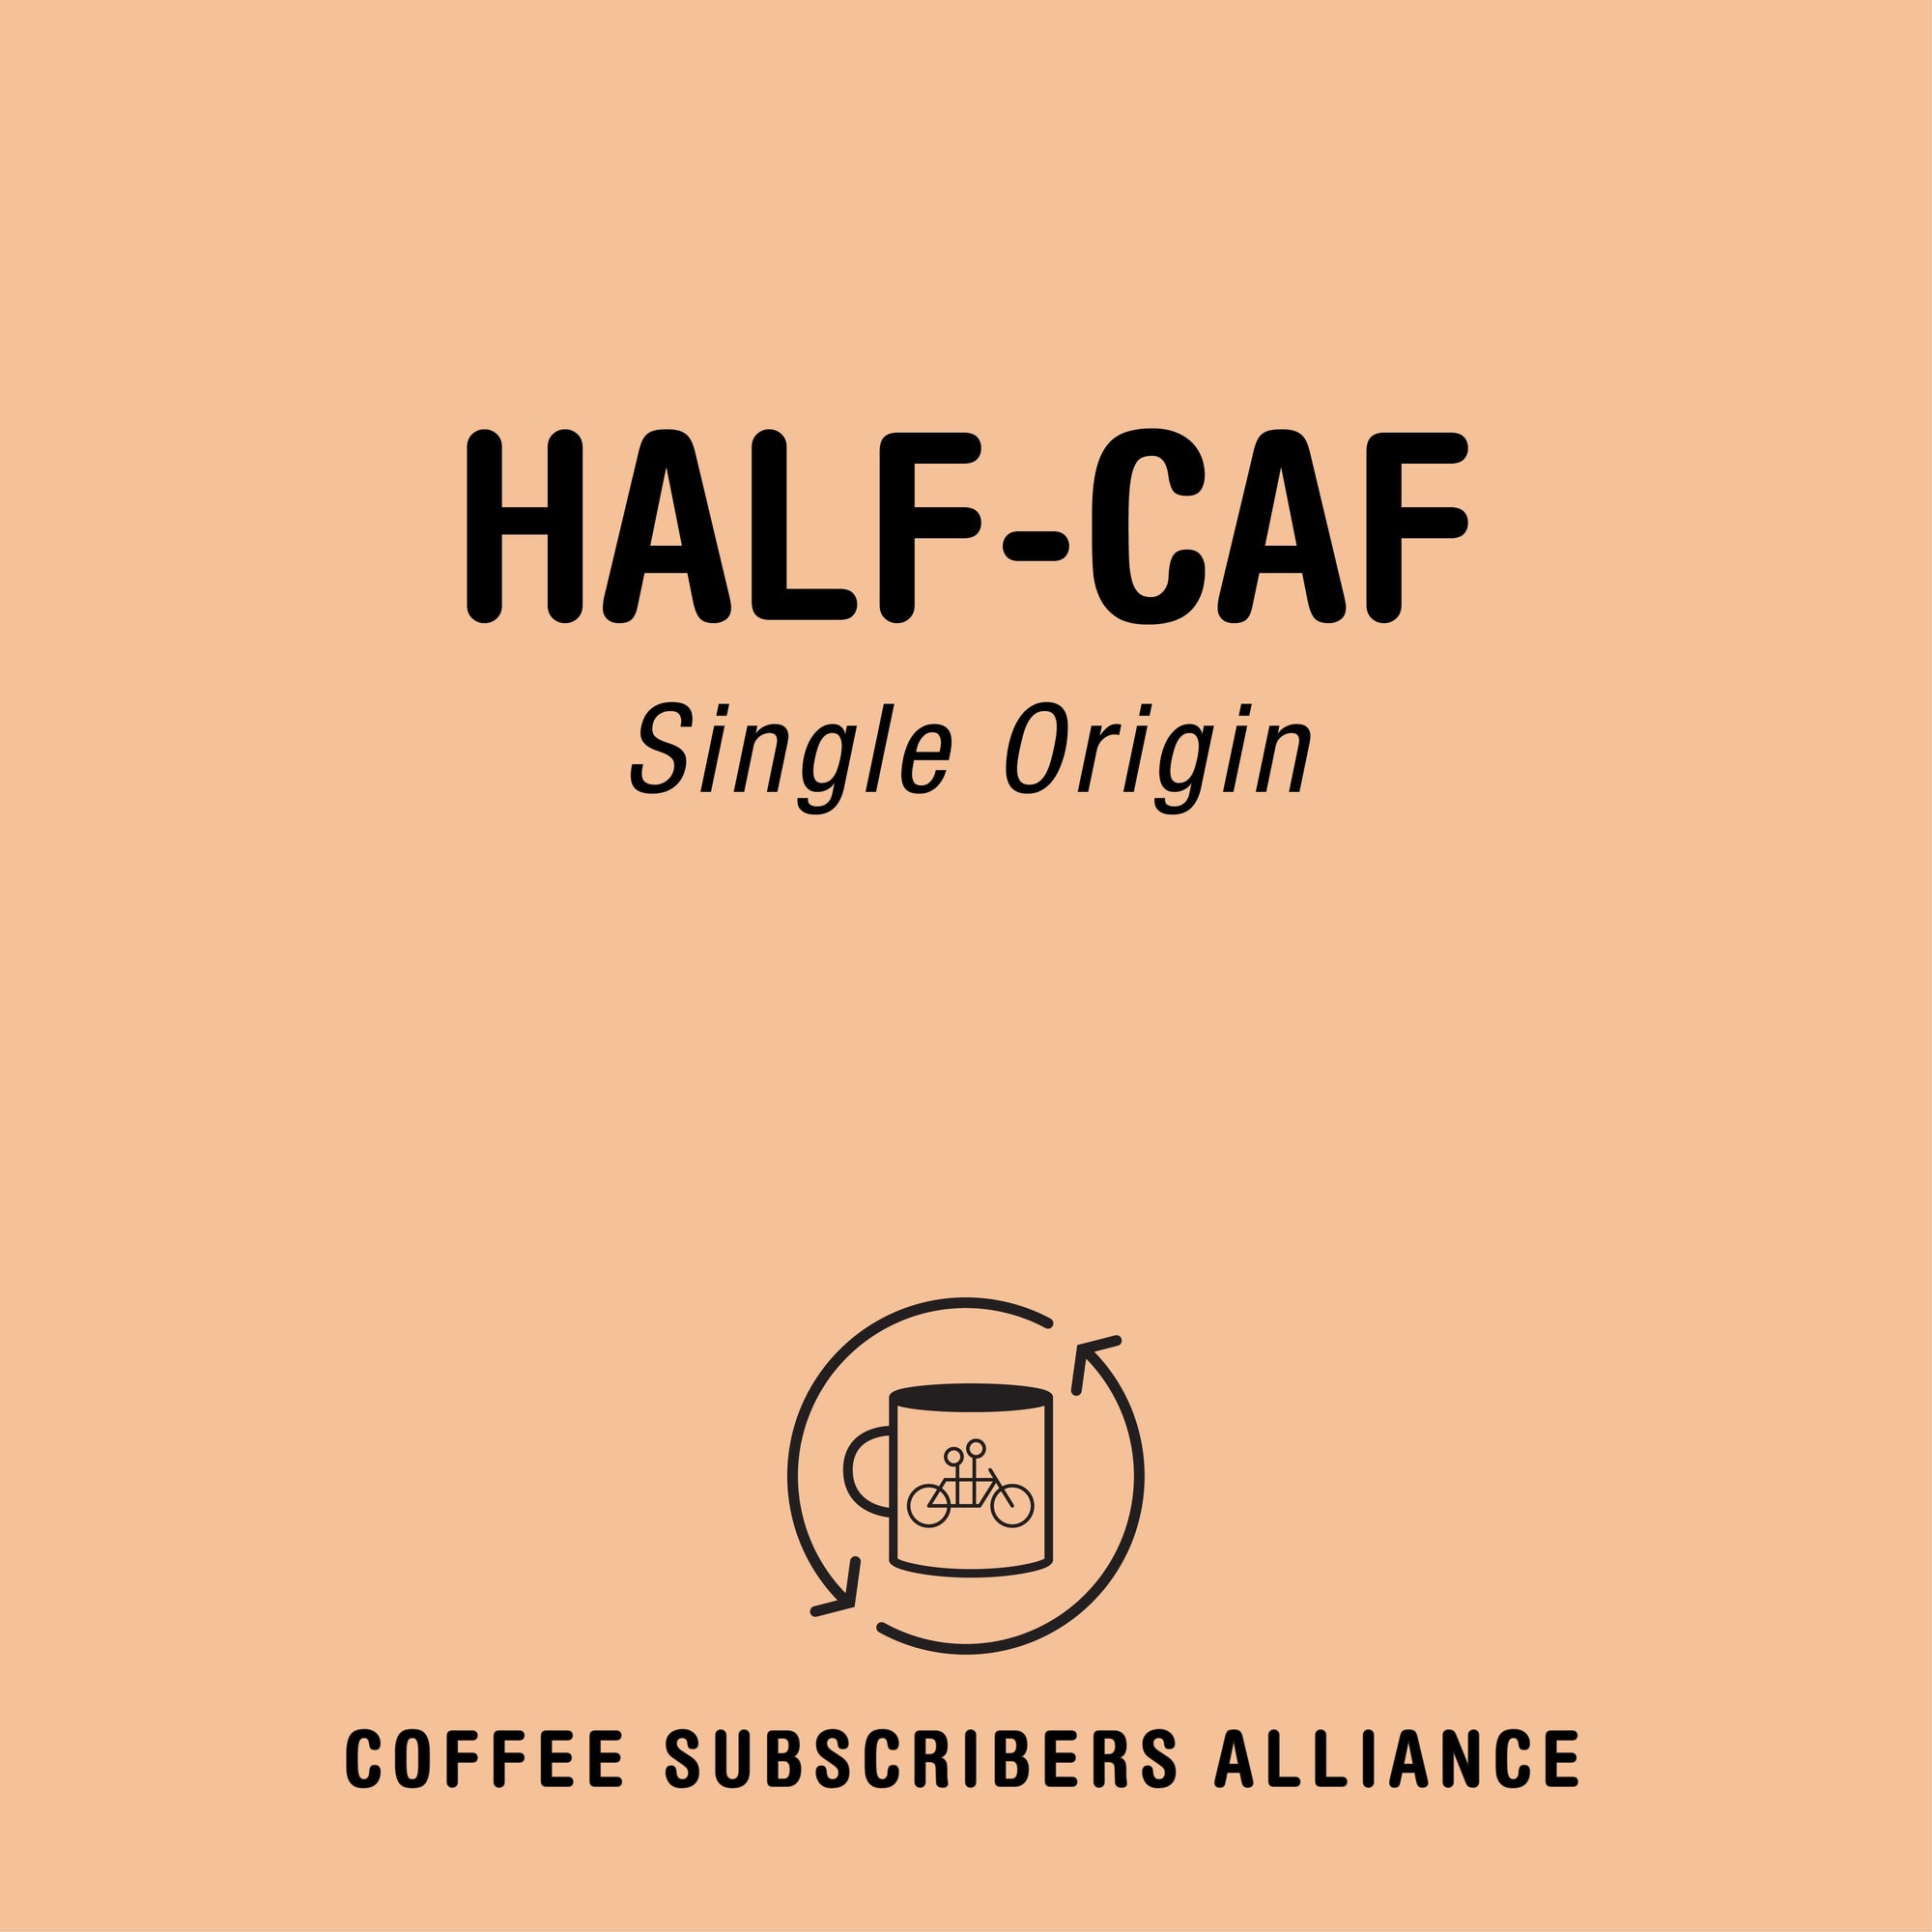 A minimalist graphic with the text "single origin drip" at the top, featuring a circular logo labeled "coffee subscribers alliance" with a stylized coffee cup icon, all set against a plain peach background for the Half-Caf Subscription Gift 2 Weeks x 3 by Tandem.